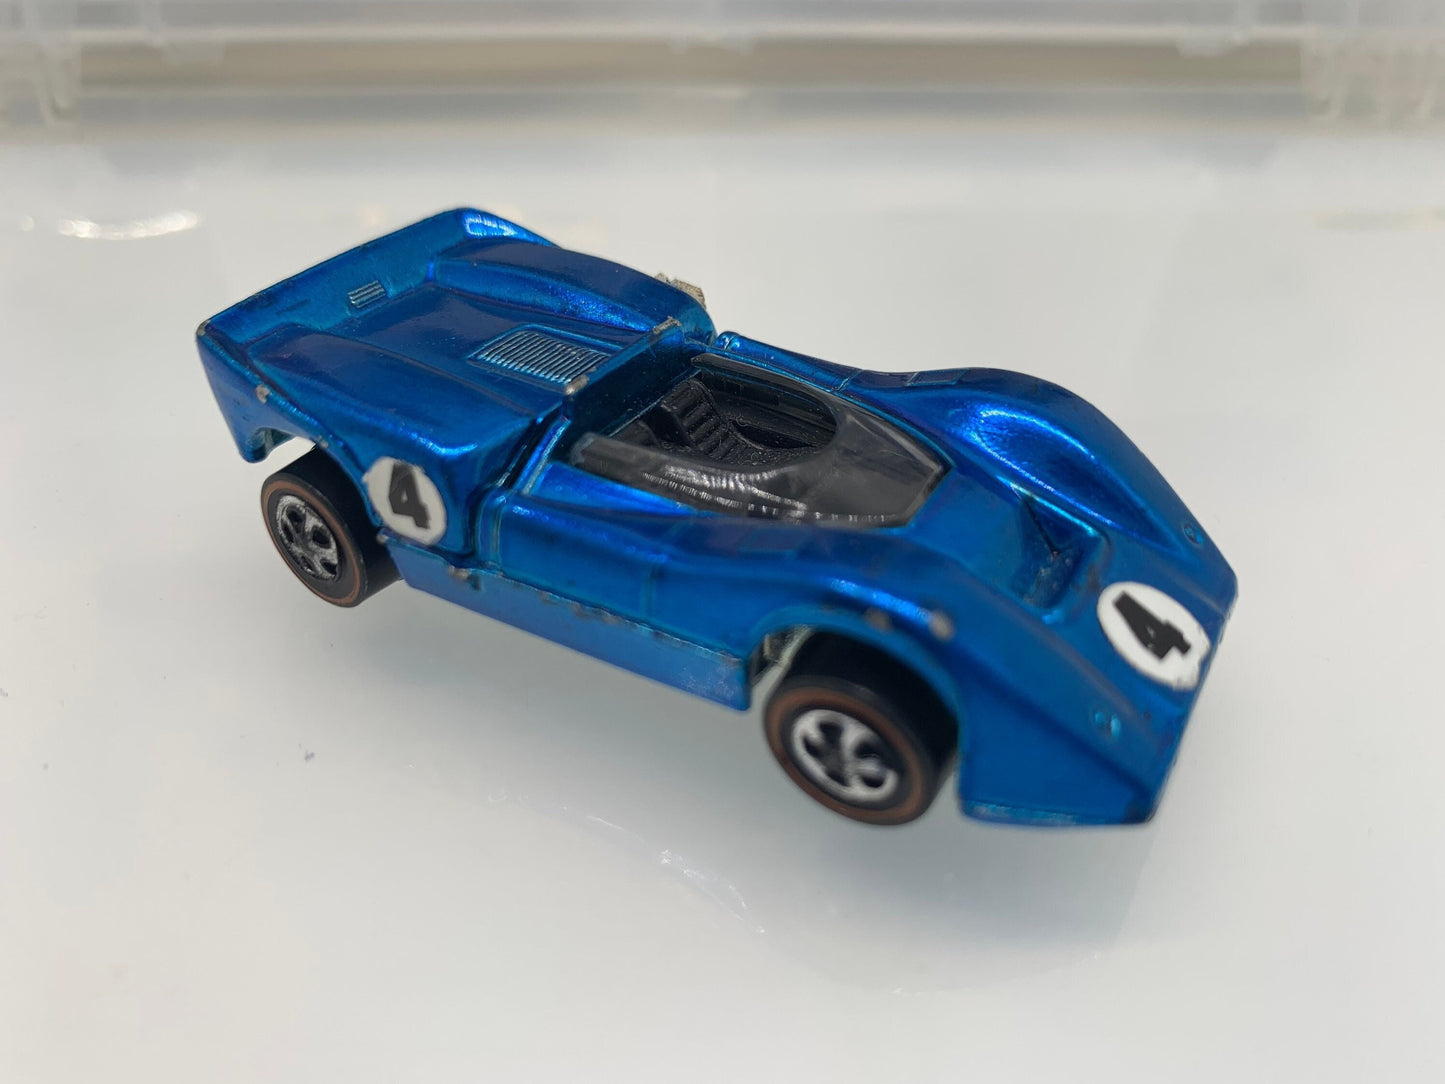 1969 Redline McLaren M6A Blue Hot Wheels Collectable Scale Model Miniature Toy Car Perfect Birthday Gift